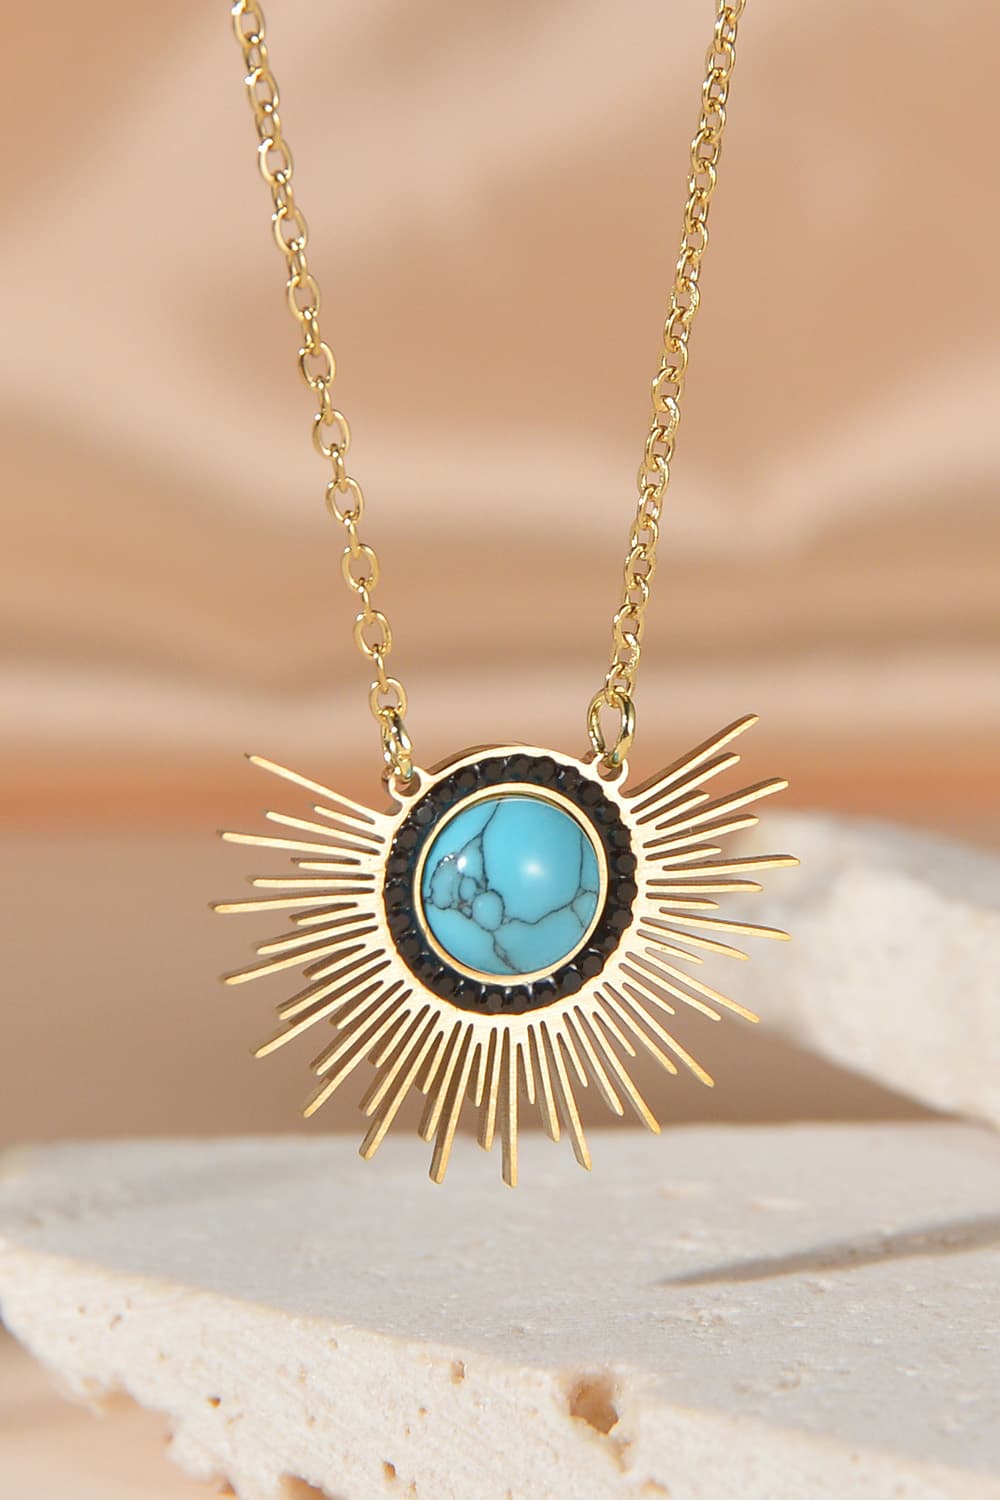 Turquoise 14K Gold Plated Pendant Necklace - Guy Christopher 